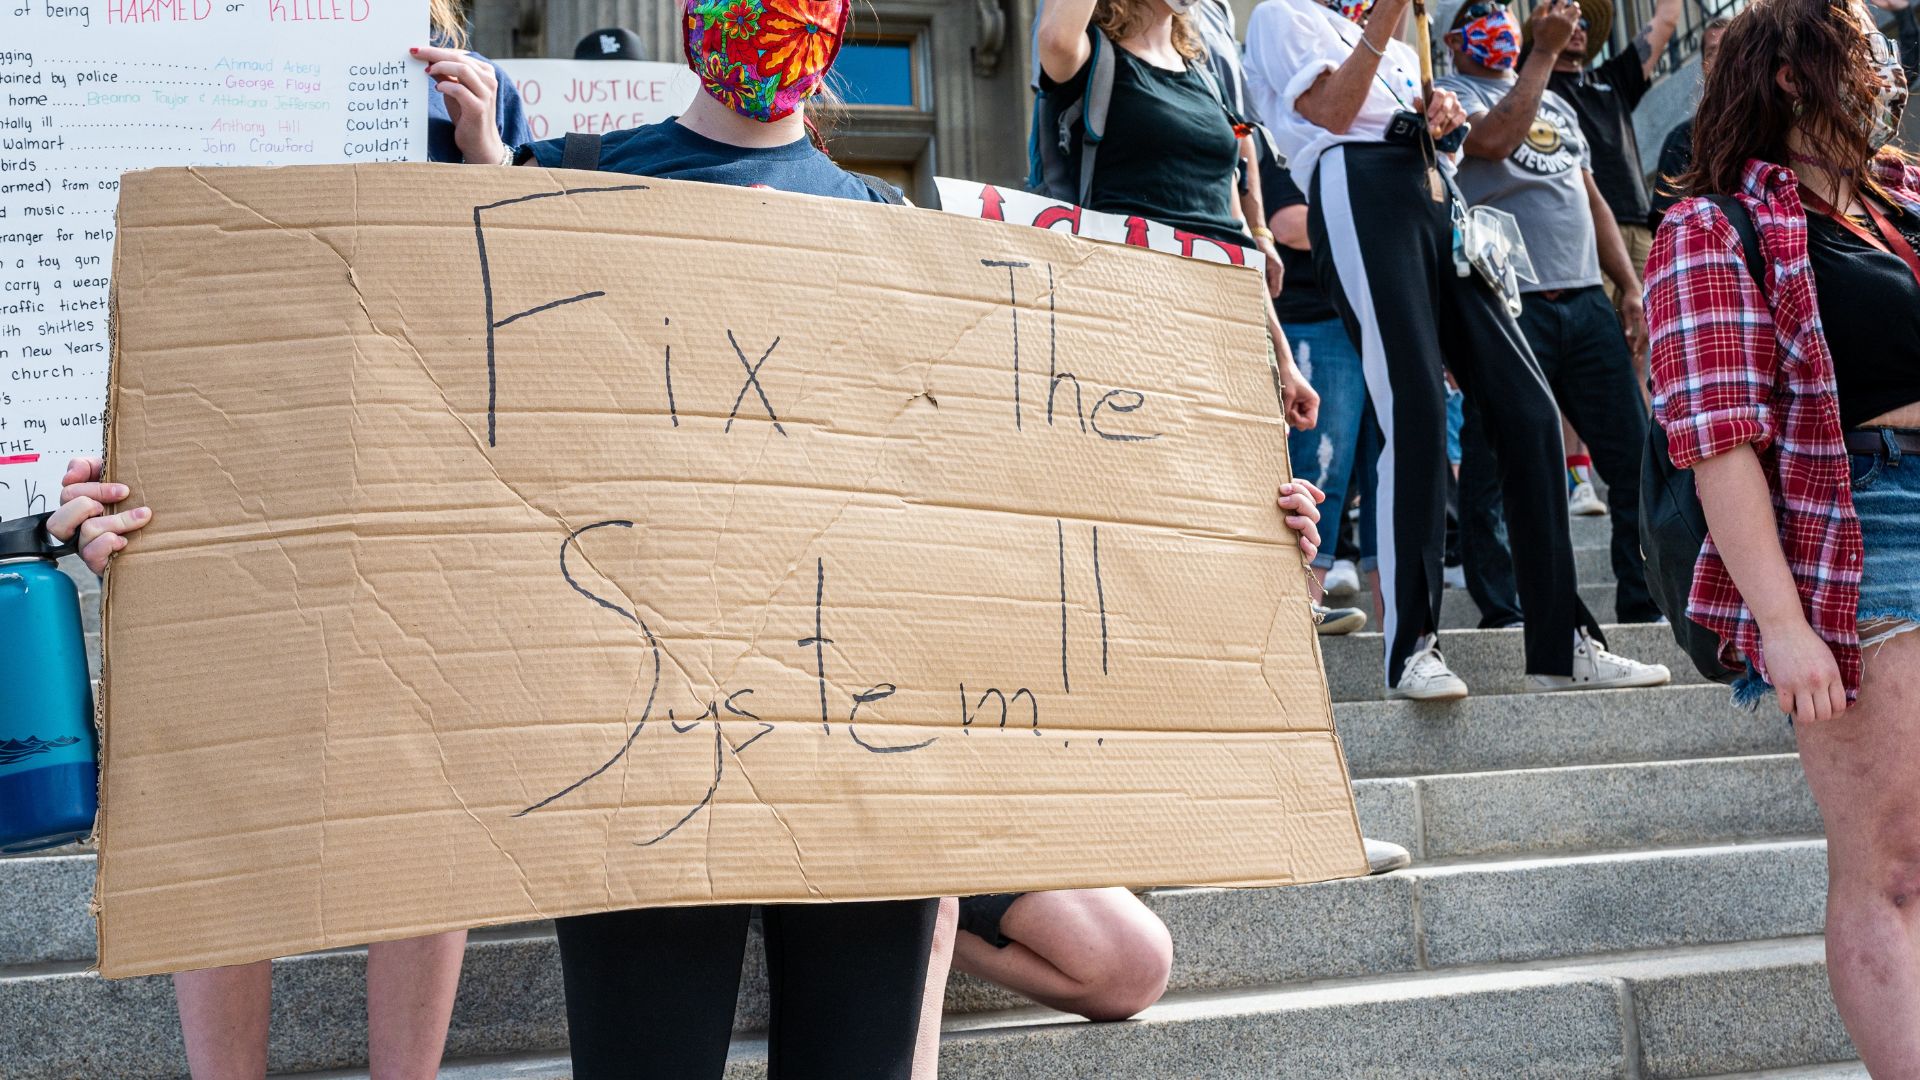 A protestor with a floral mask holds up a cardboard sign that reads 'fix the system'